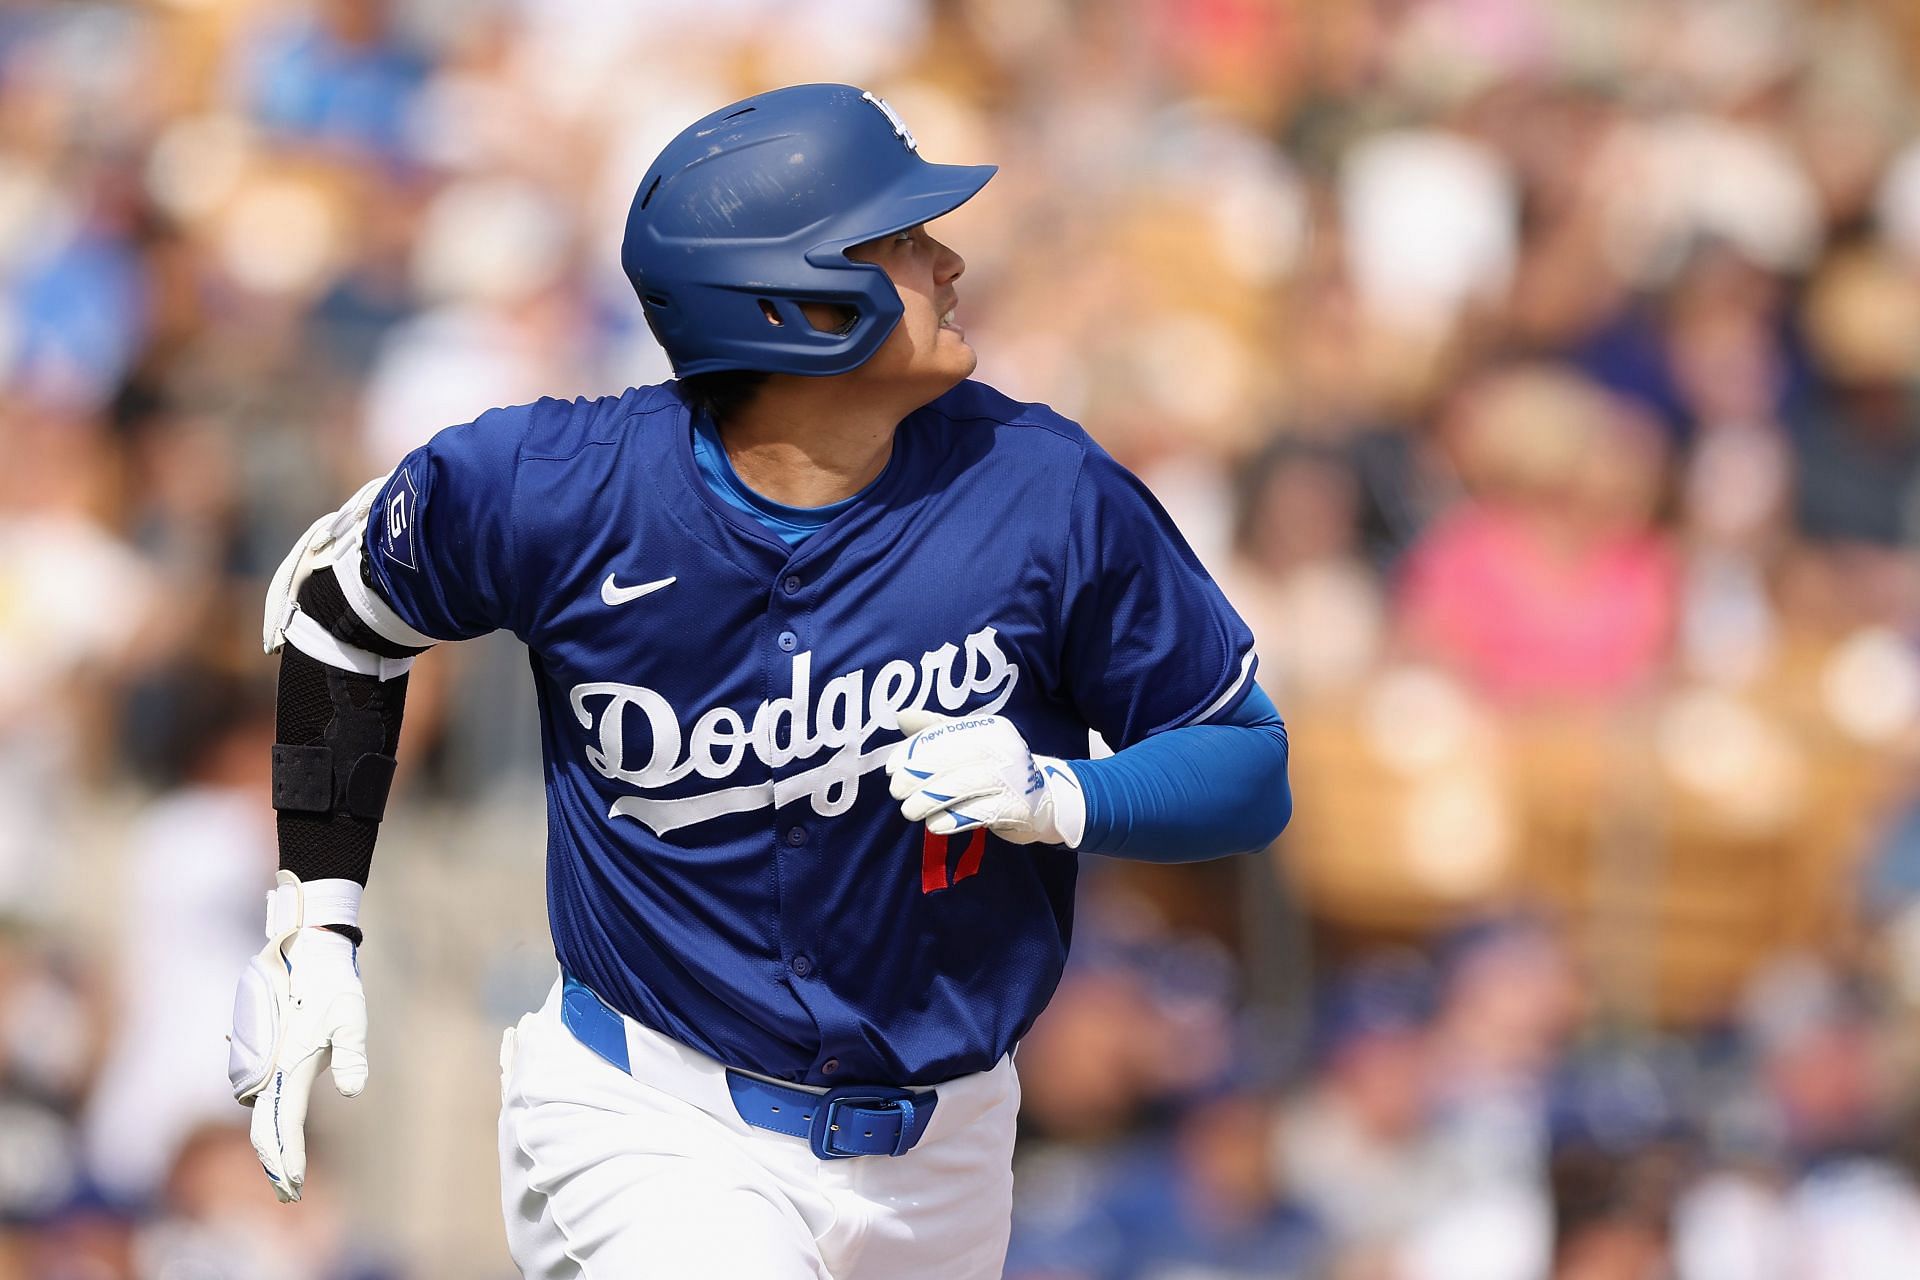 The Japanese sensation has proven to be a valuable addition to the Dodgers roster after going 5-for-7 in spring training.